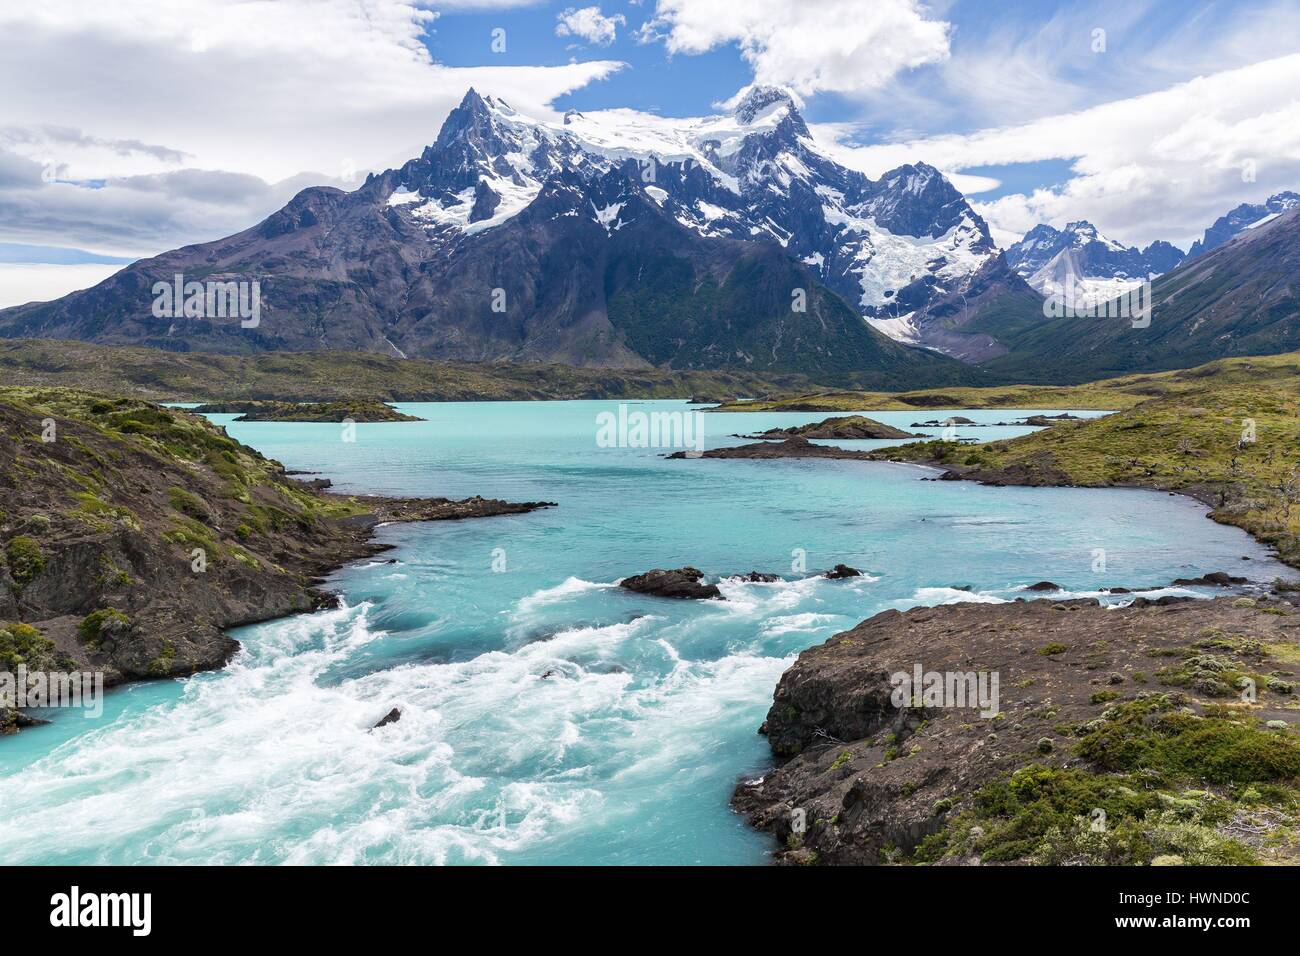 Chile, Patagonia, Aysen region, Torres del Paine national park, Salto Grande waterfall between the Nordenskjöld and Pehoe lakes Stock Photo